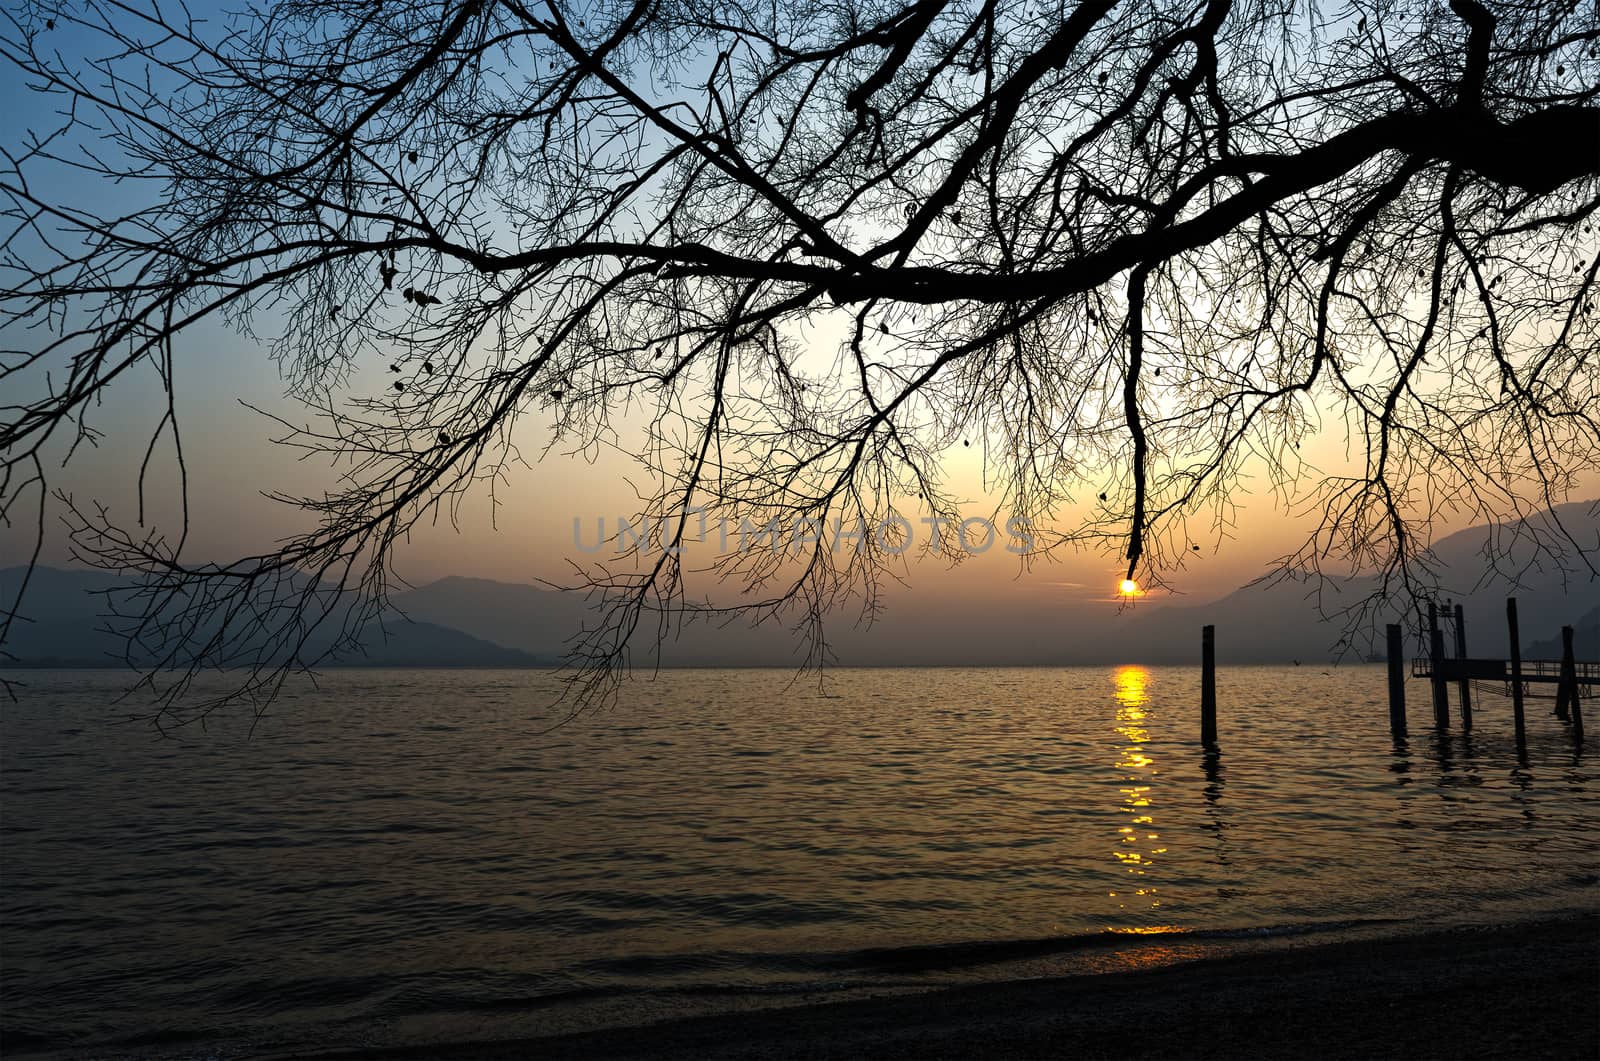 sunset over the lake major with the mists of the horizon and mountains in the background on a winter afternoon, Maccagno - Lombardy, Italy